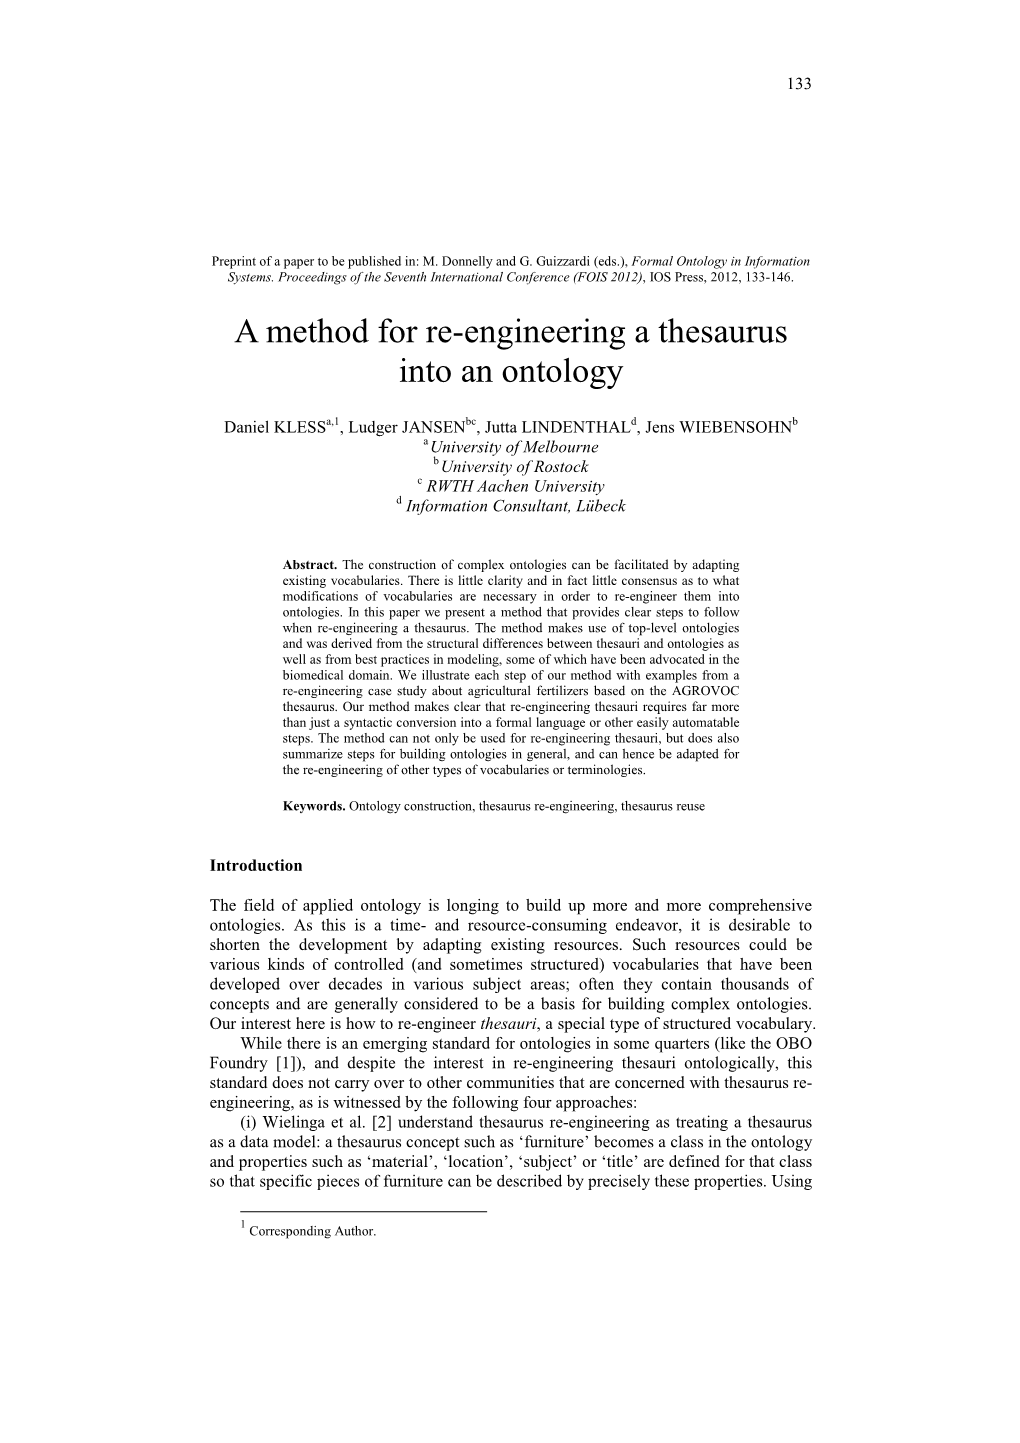 A Method for Reengineering a Thesaurus Into an Ontology FOIS